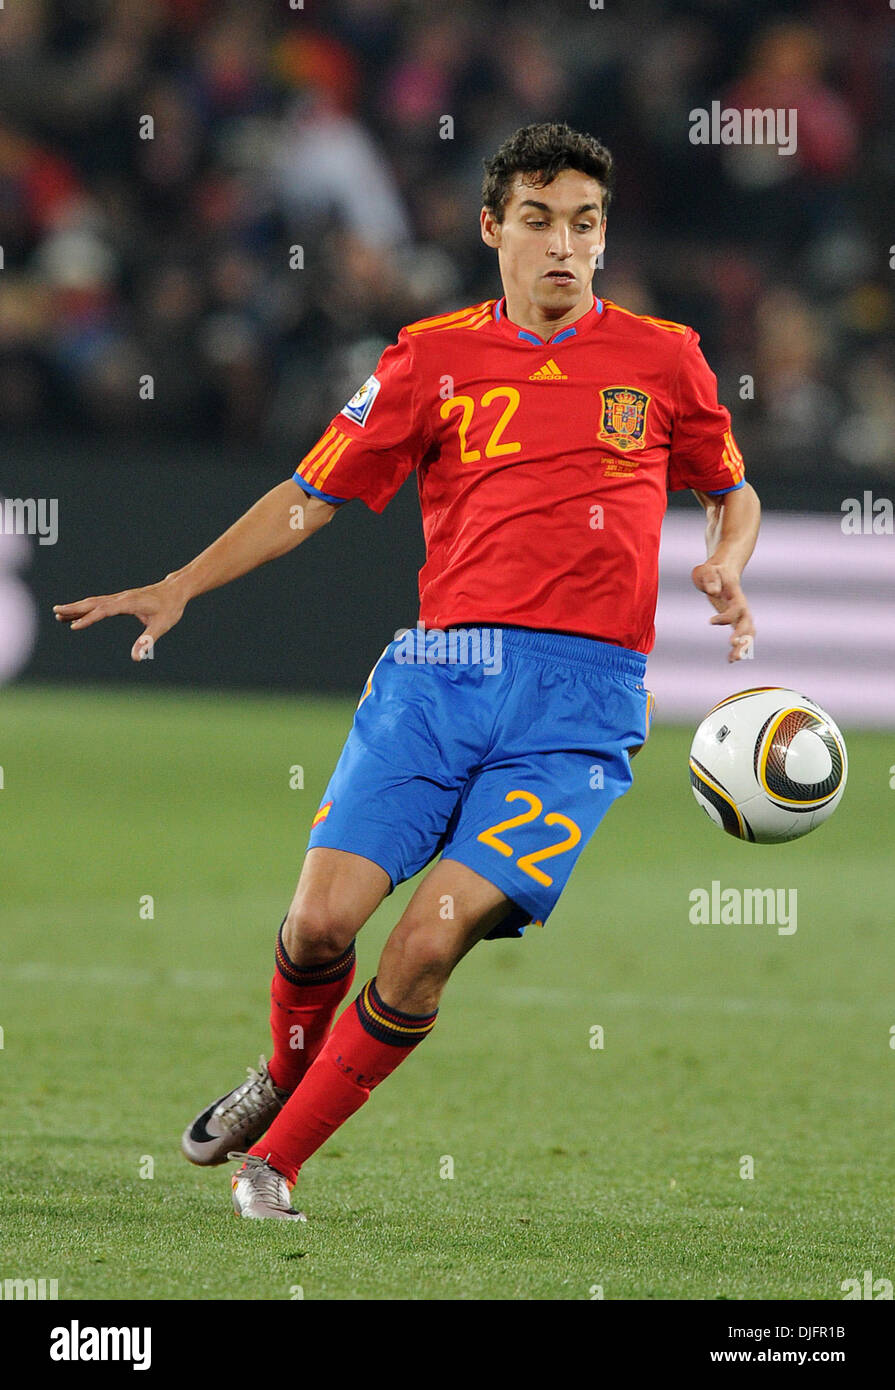 June 21, 2010 - Johannesburg, South Africa - Jesus Navas of Spain in action during the 2010 FIFA World Cup soccer match between Spain and Honduras at Ellis Park Stadium on June 21, 2010 in Johannesburg, South Africa. (Credit Image: © Luca Ghidoni/ZUMApress.com) Stock Photo